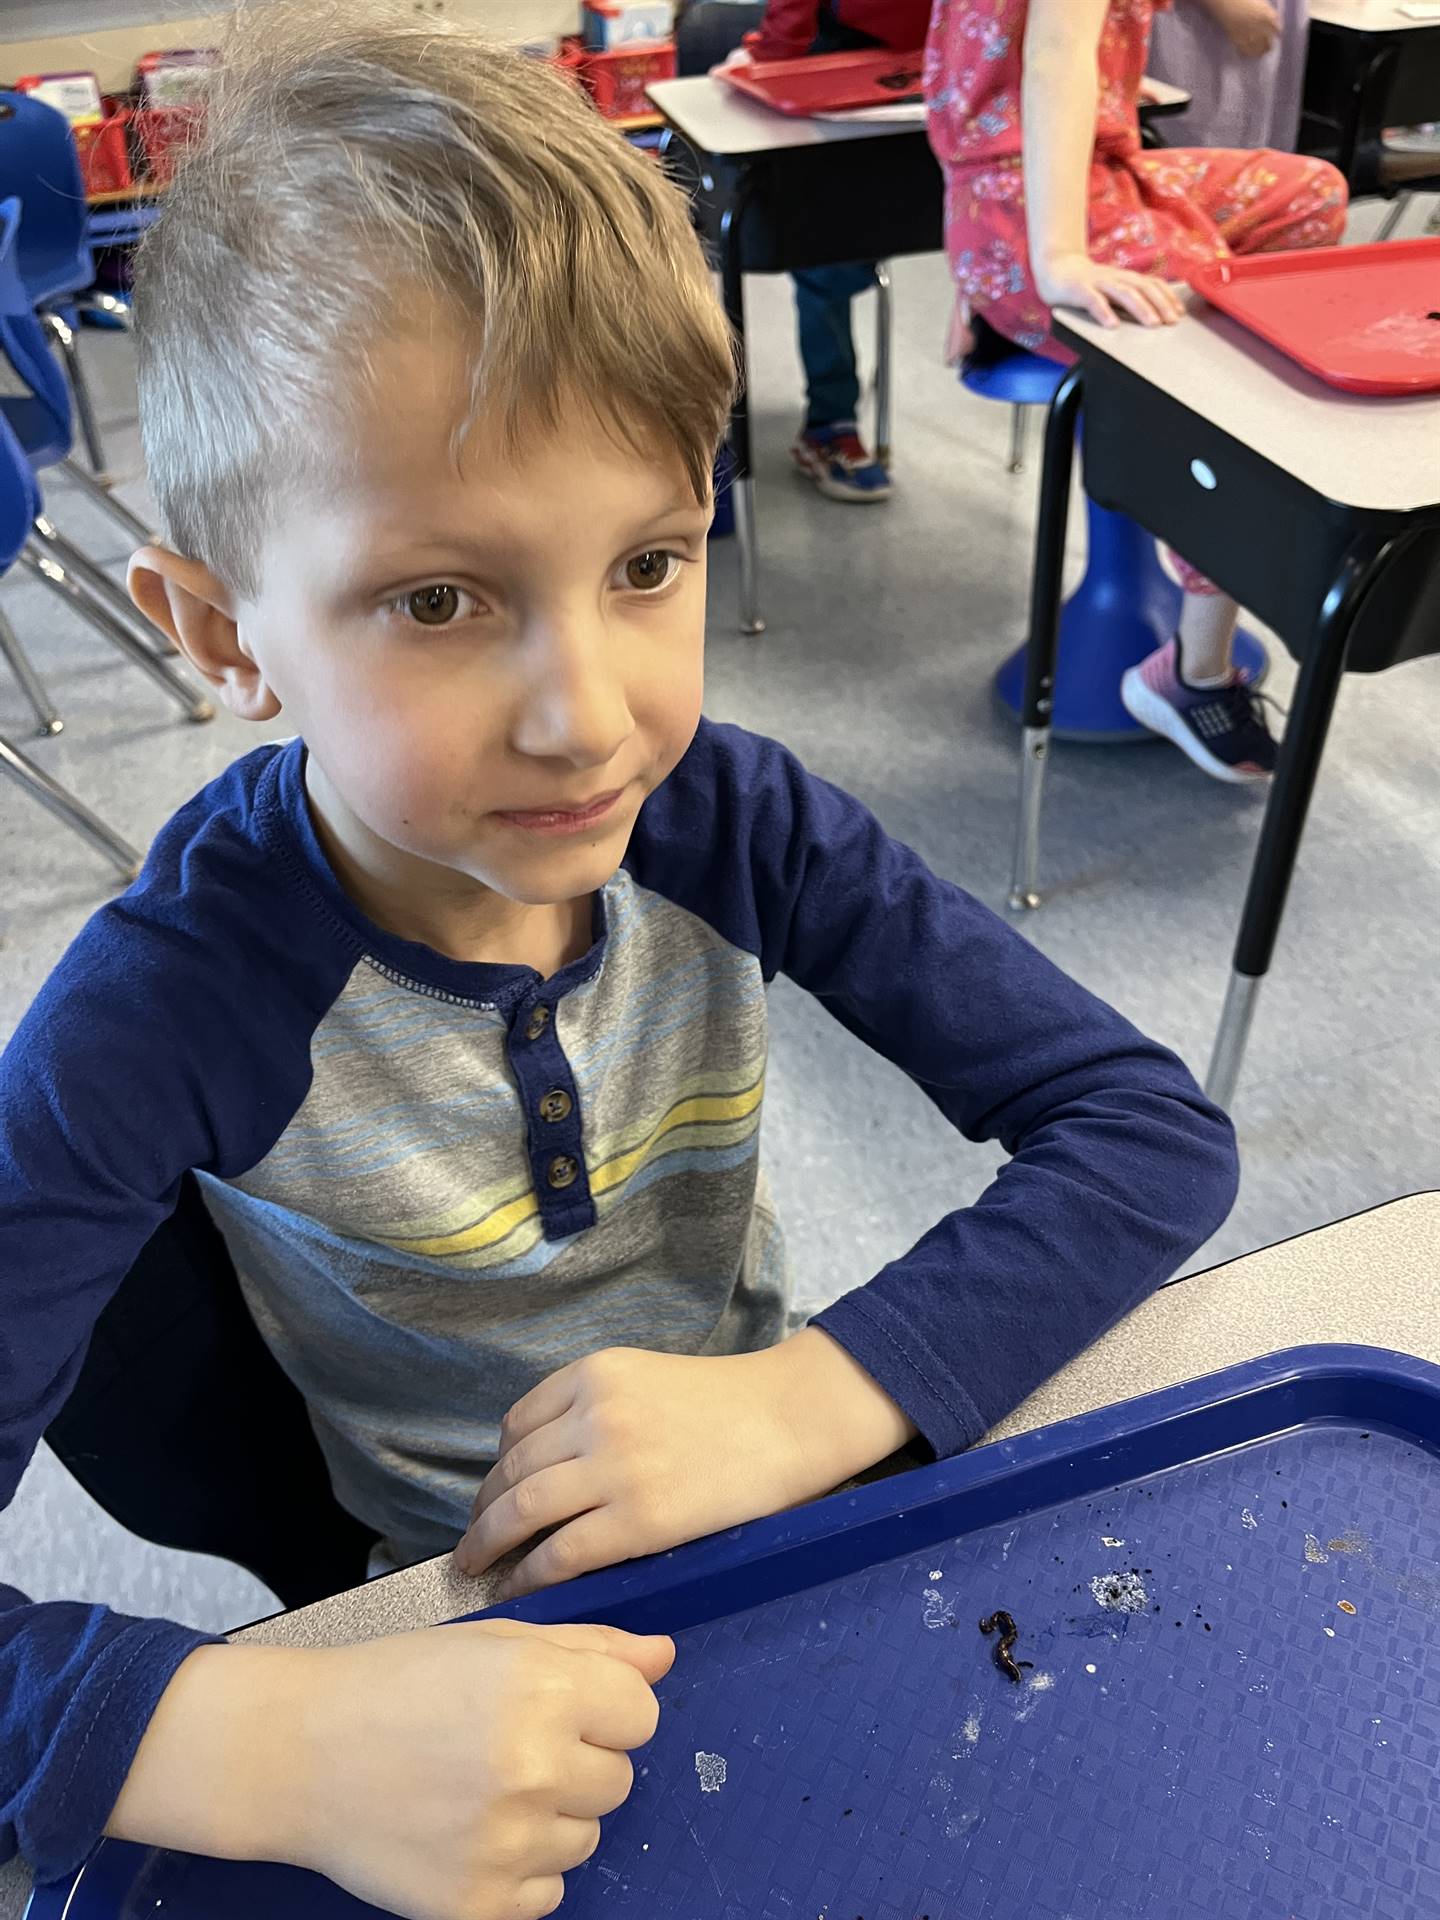 a student makes a face as worms crawl on a tray